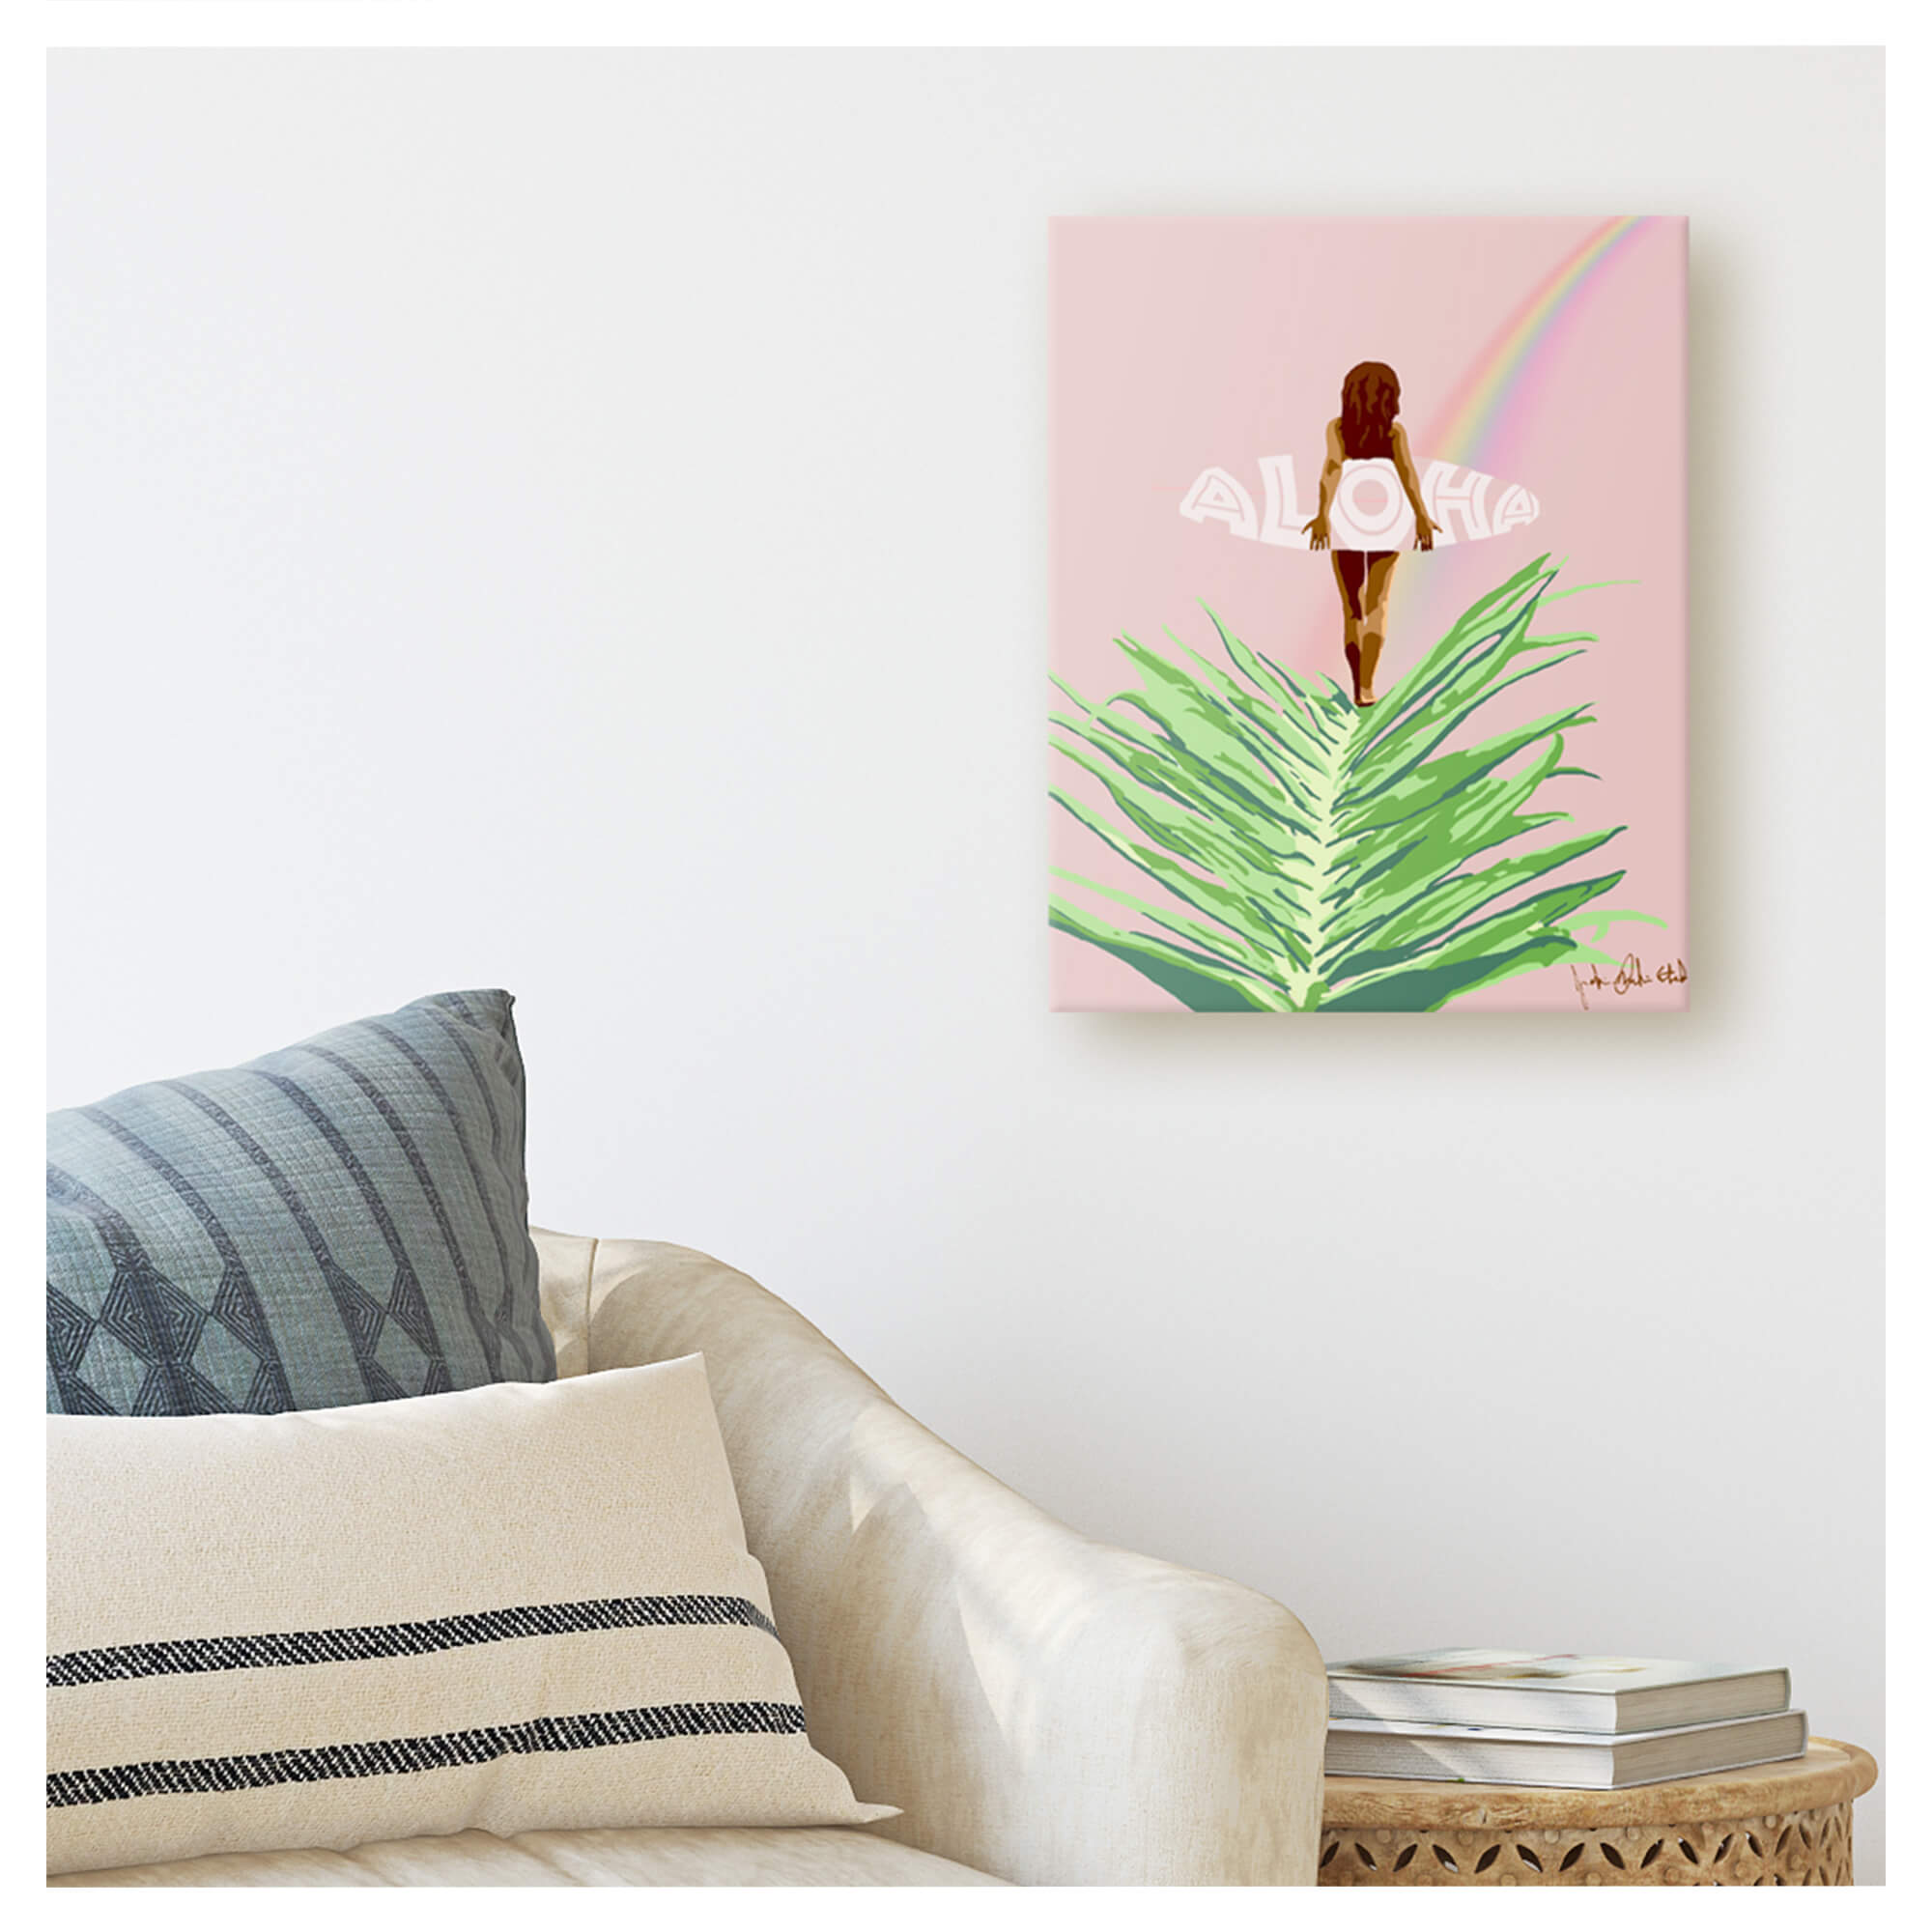 A canvas giclée print featuring a woman holding a surfboard following a beautiful rainbow on a pastel pink background by Hawaii artist Jackie Eitel